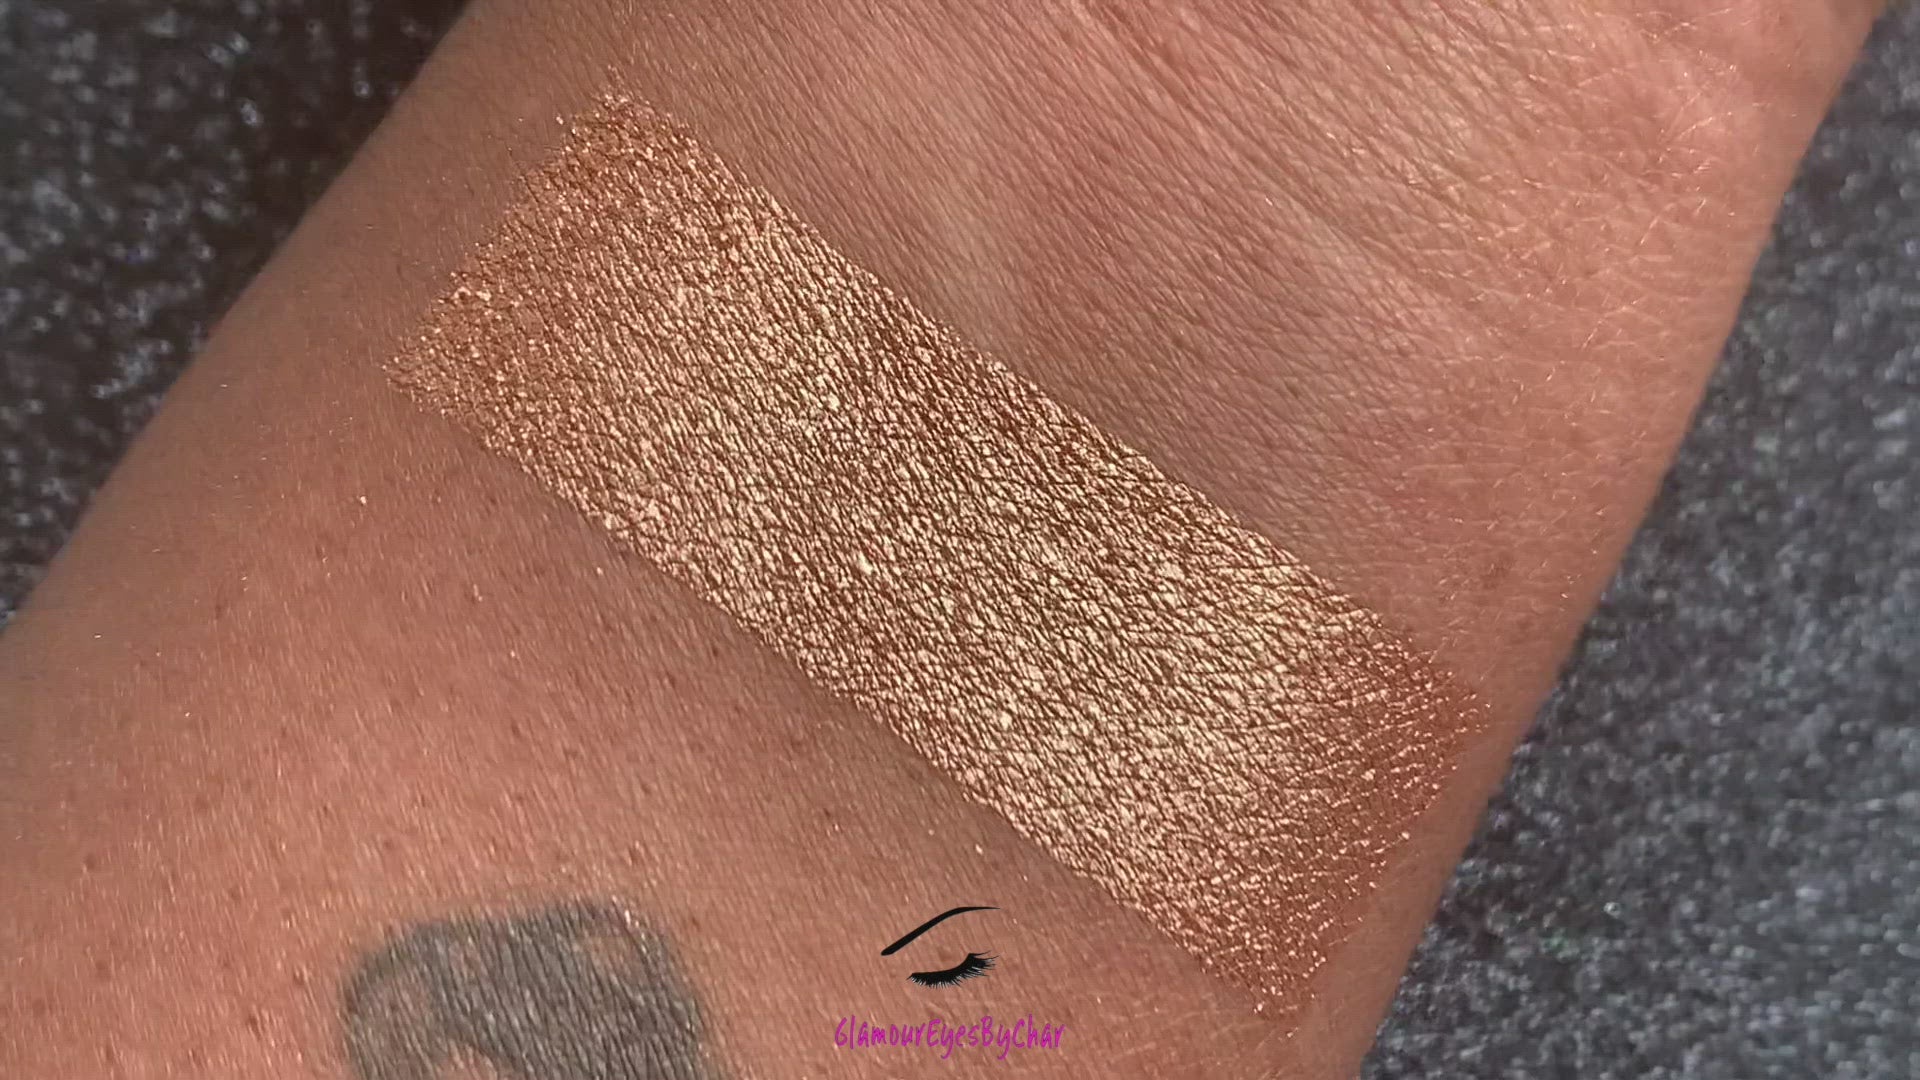 Egyptian Sand Glamlighter is a cool brown bronze shade which has been warmed up with golds and reds. It can be applied as a highlighter or an eyeshadow.